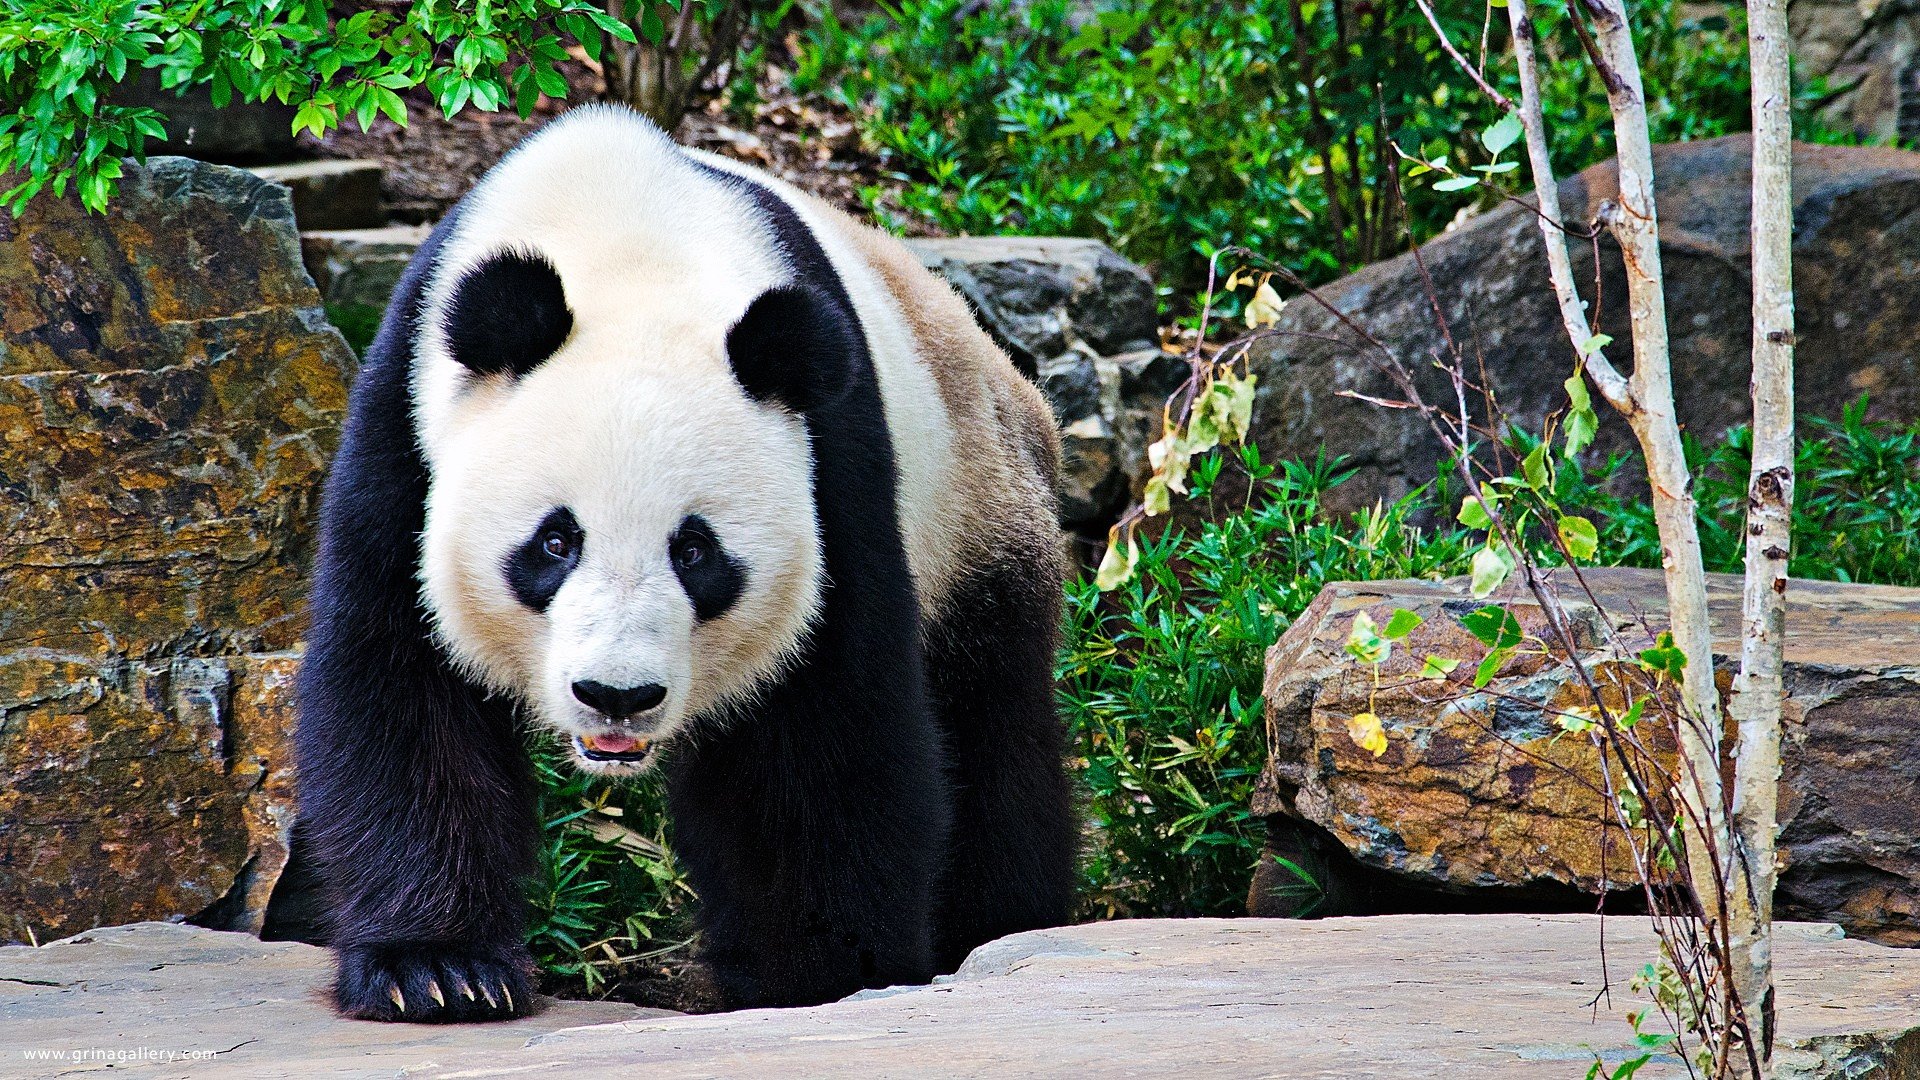 Download full hd 1080p Panda PC background ID:300452 for free